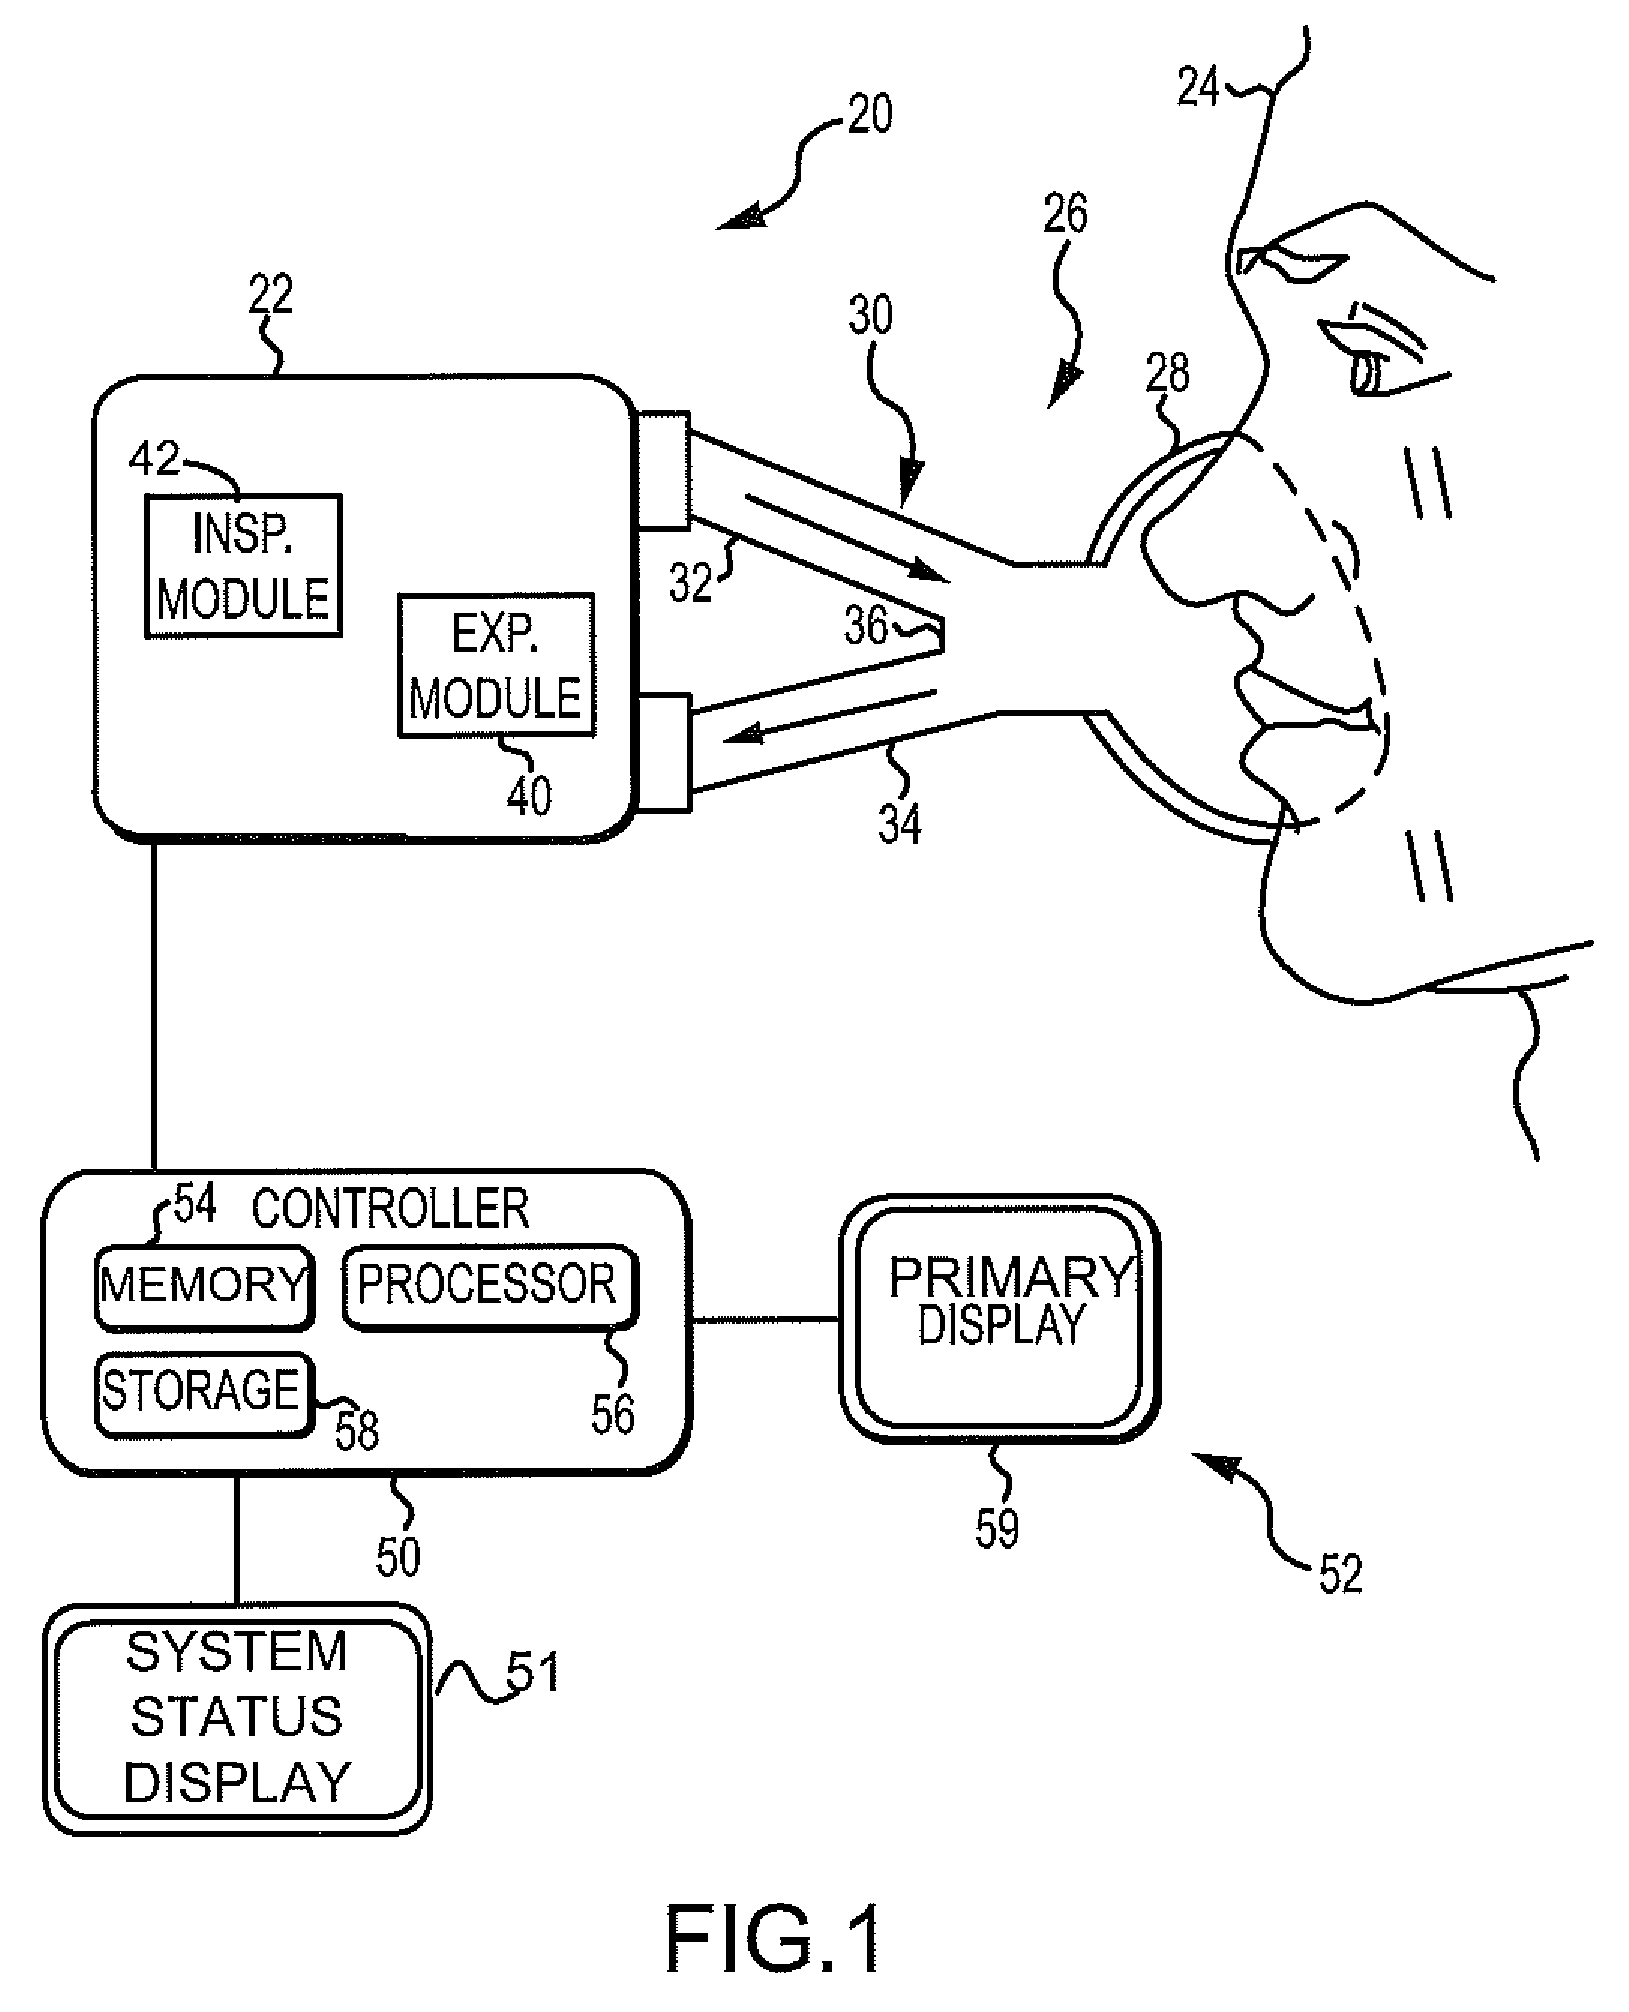 Ventilation System With System Status Display For Configuration And Program Information